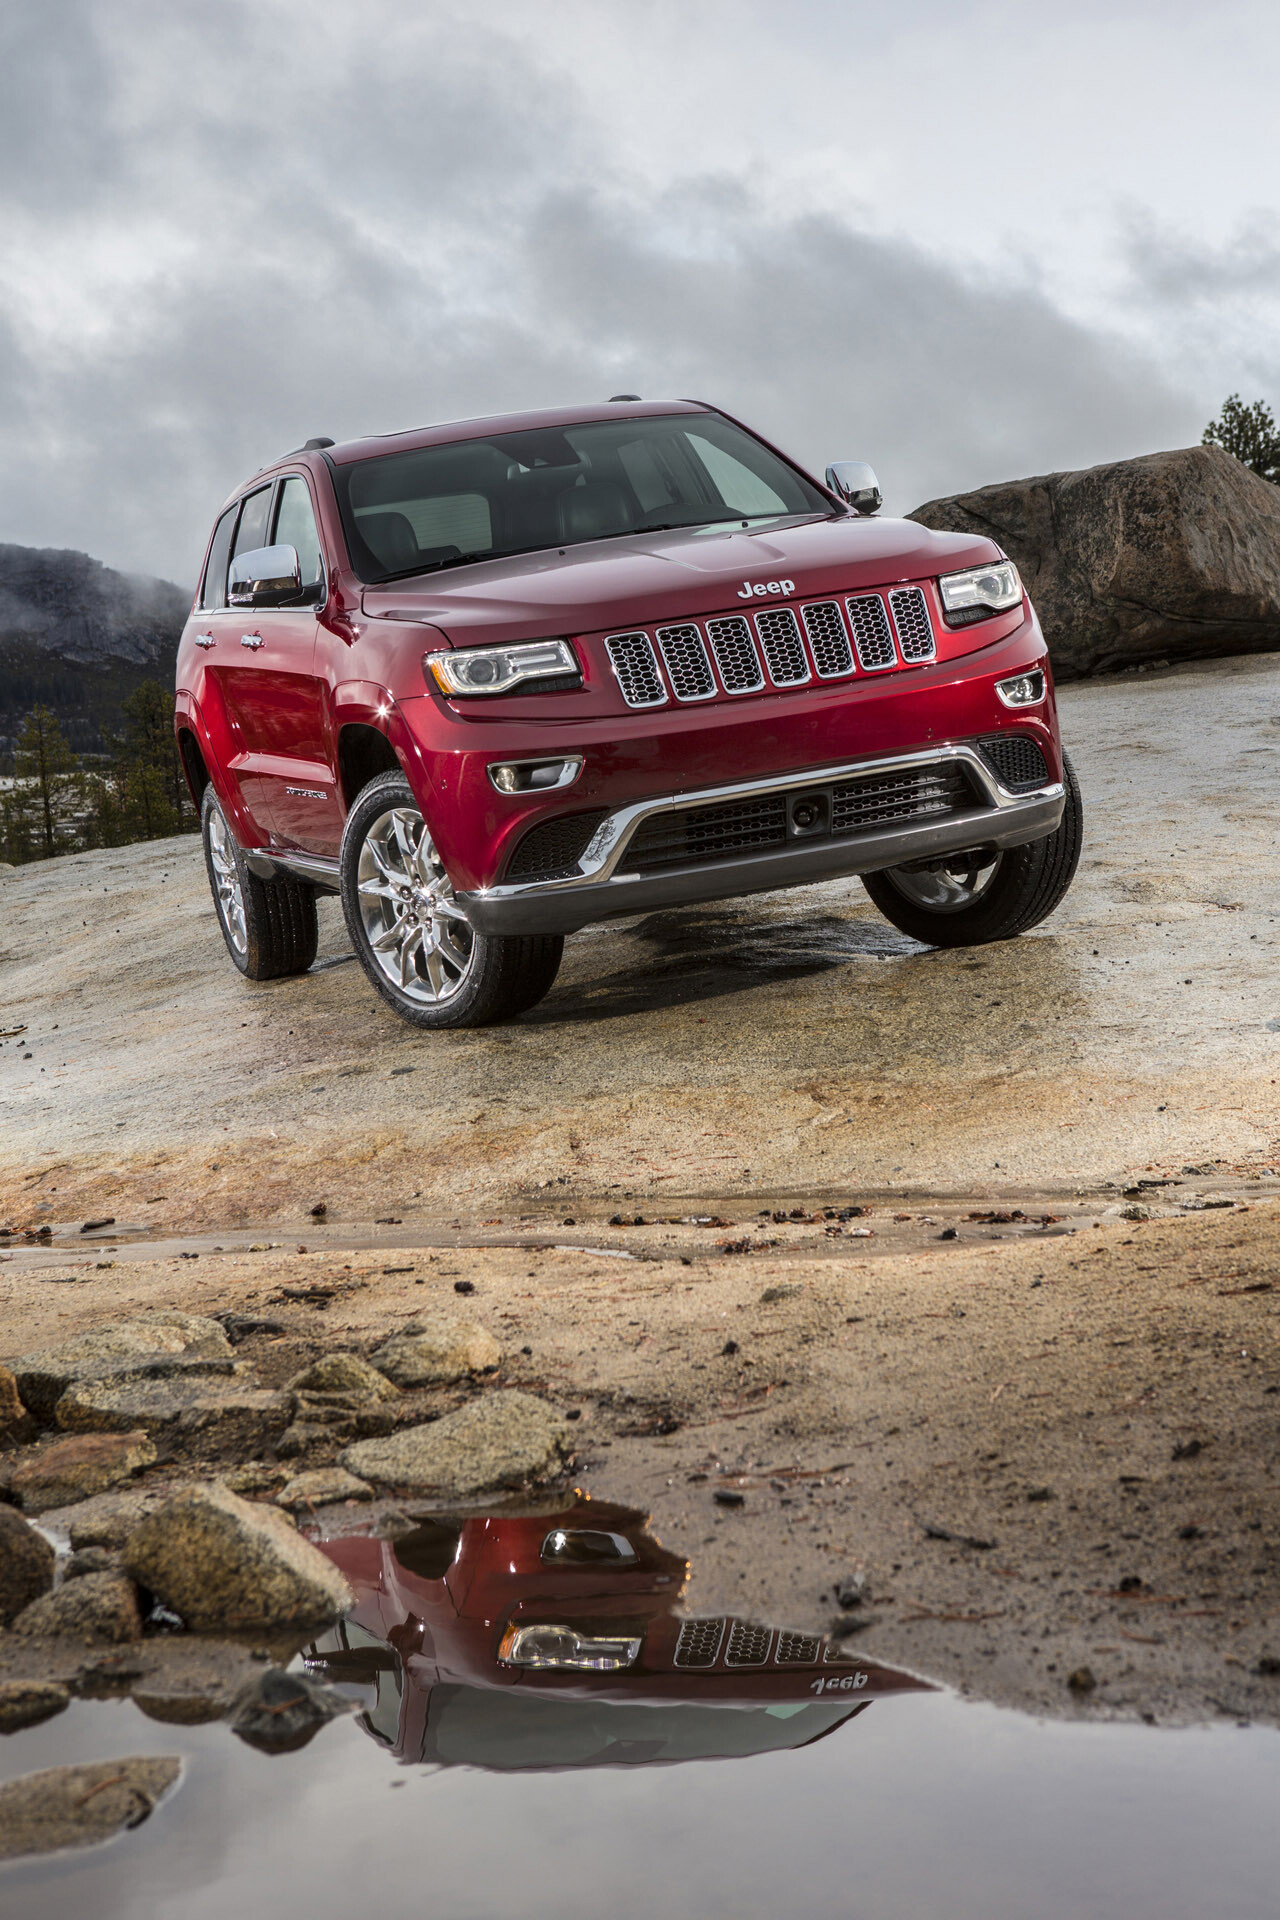 Jeep Grand Cherokee: A range of mid-size SUVs produced by the American manufacturer. 1280x1920 HD Wallpaper.